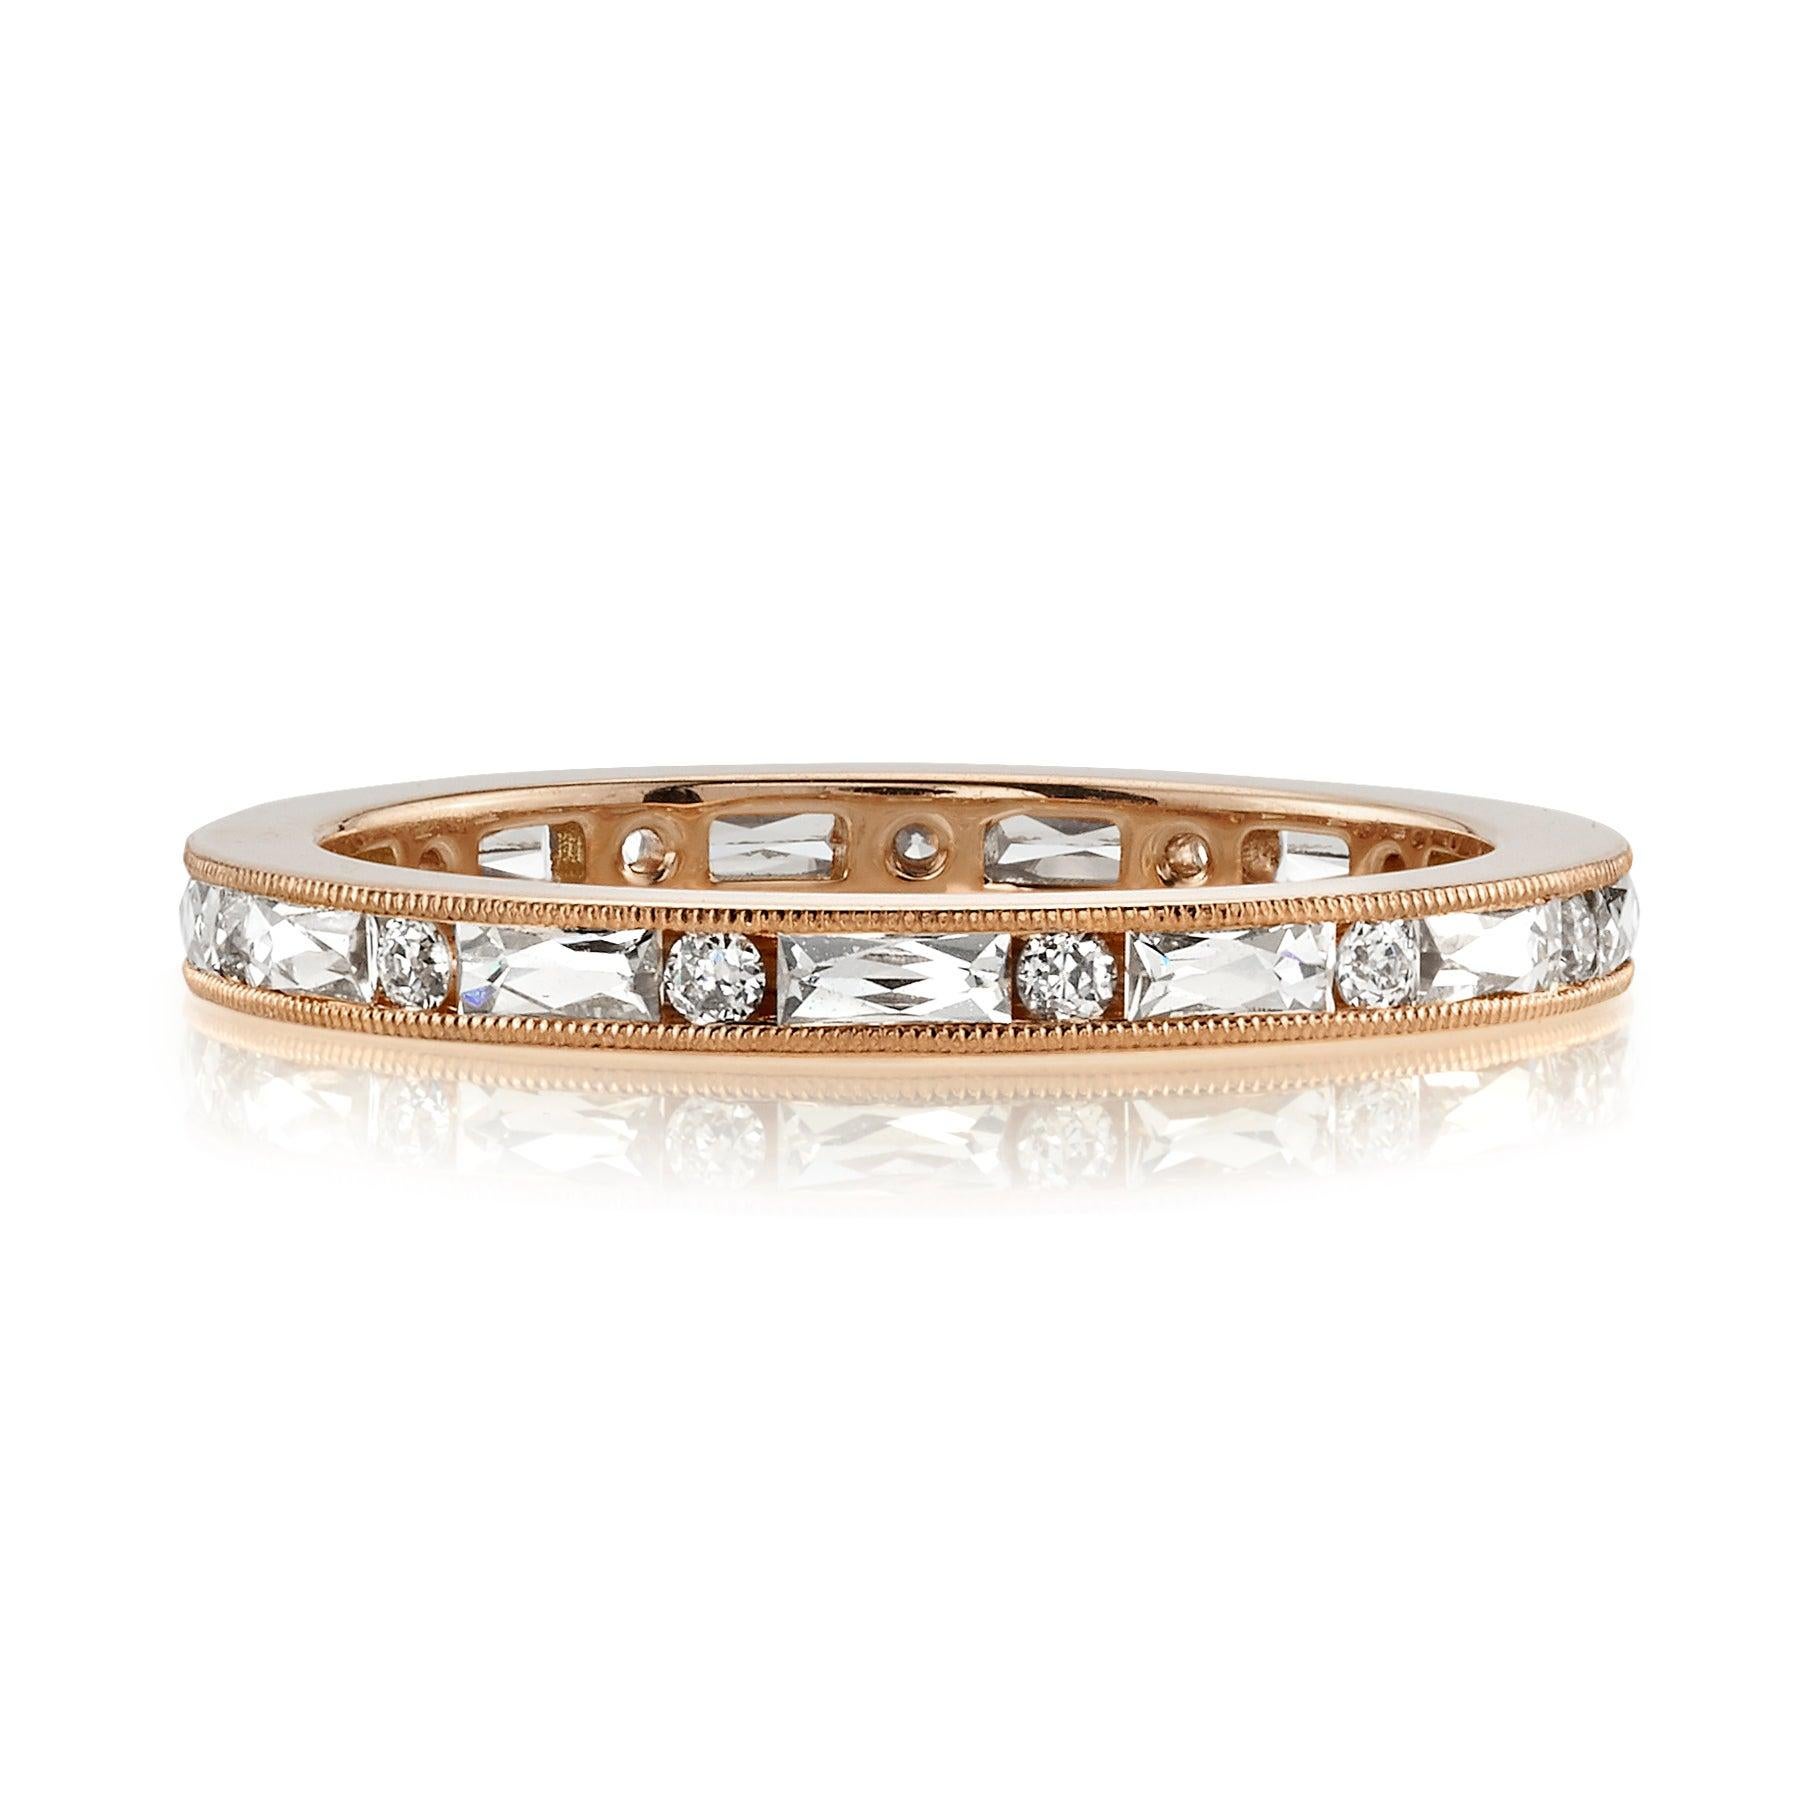 For Sale:  Handcrafted Paige Old European/French Cut Diamond Eternity Band by Single Stone 3